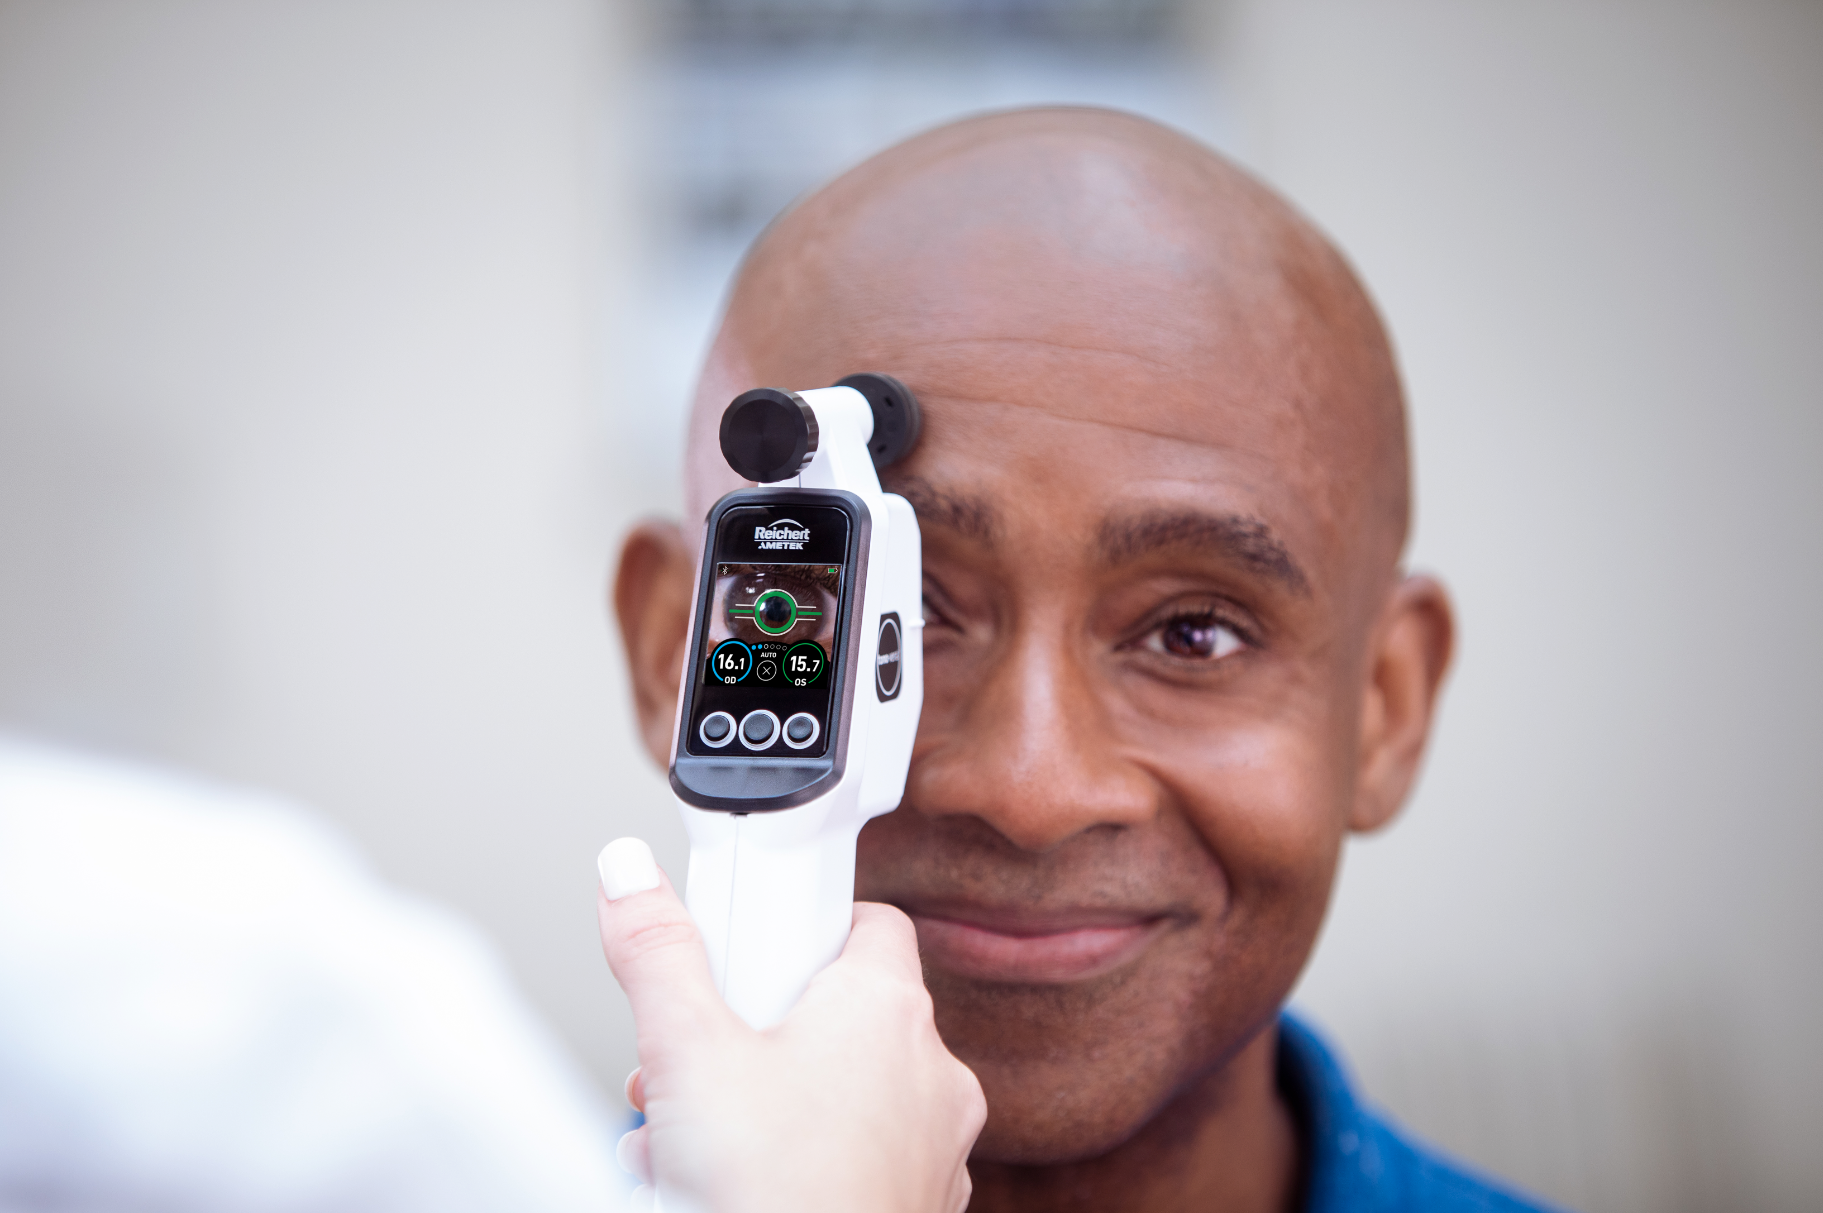 Grafton Optical are excited to launch the all-new Reichert® Tono-Vera® Tonometer at 100% Optical 2023